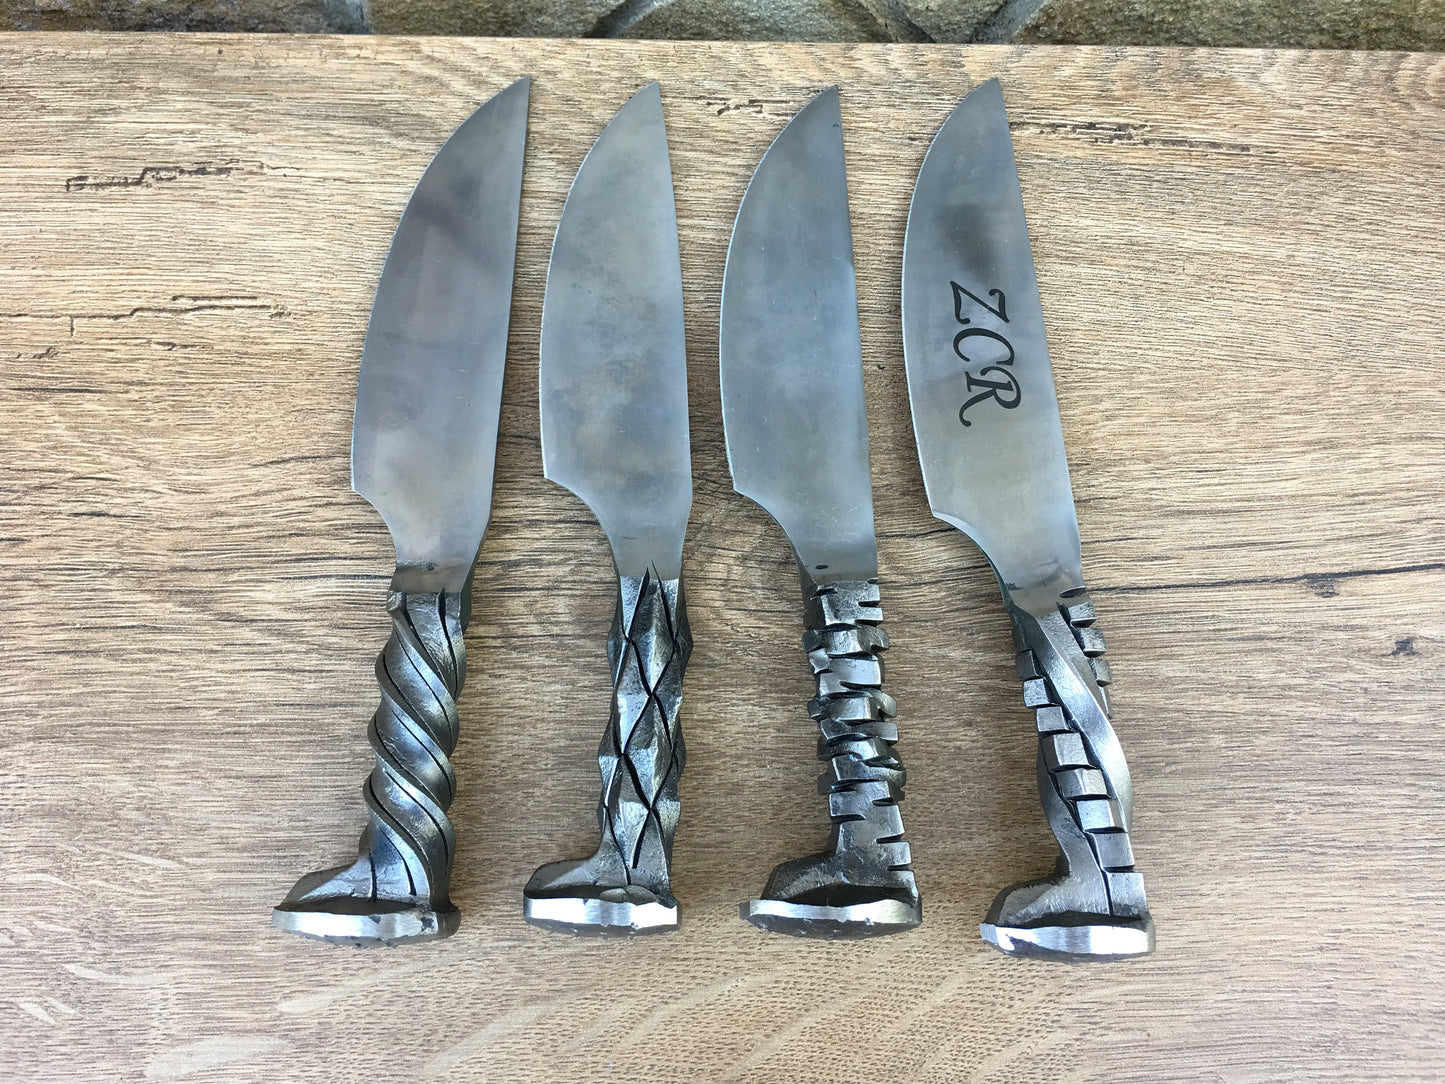 A set of 4 railroad spike knives, spike knife, iron anniversary gift, 6 year anniversary gift, wedding anniversary gift, iron gift for him